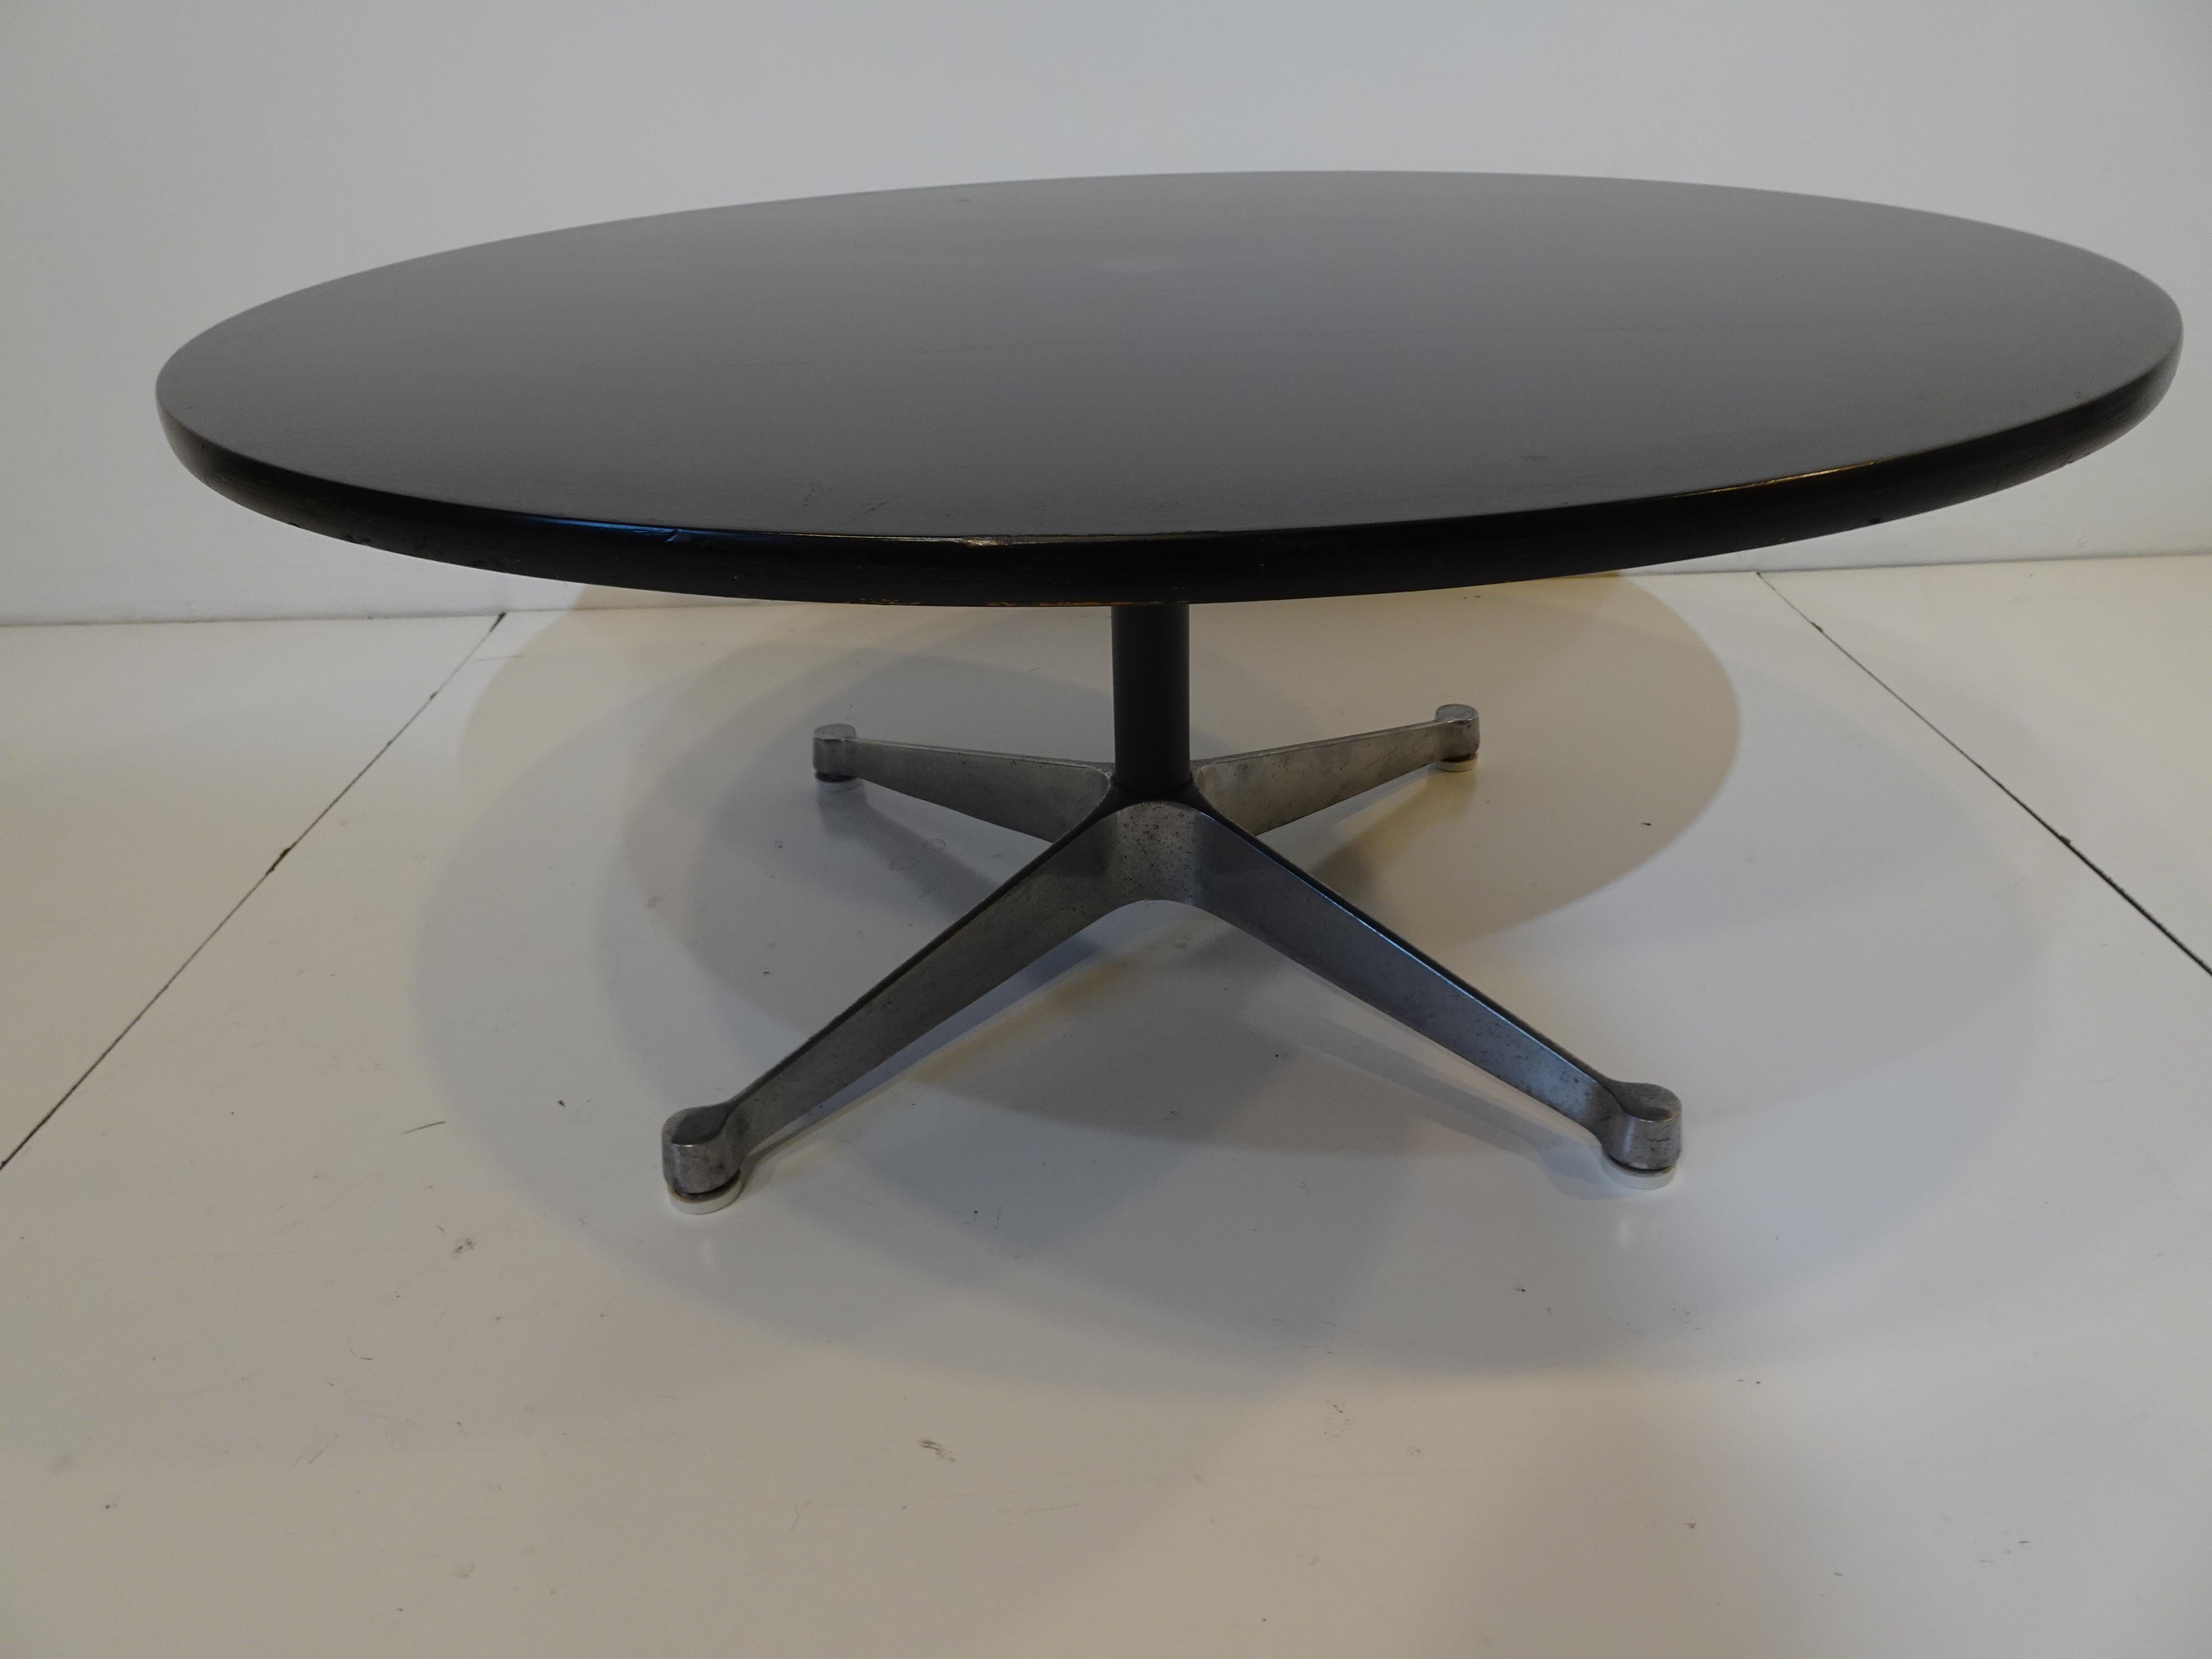 A satin black round wood coffee table with cast aluminum star base and adjustable plastic foot pads to protect your floors . A simple by strong design by Ray and Charles Eames for the Herman Miller Furniture Company from their Aluminum Group